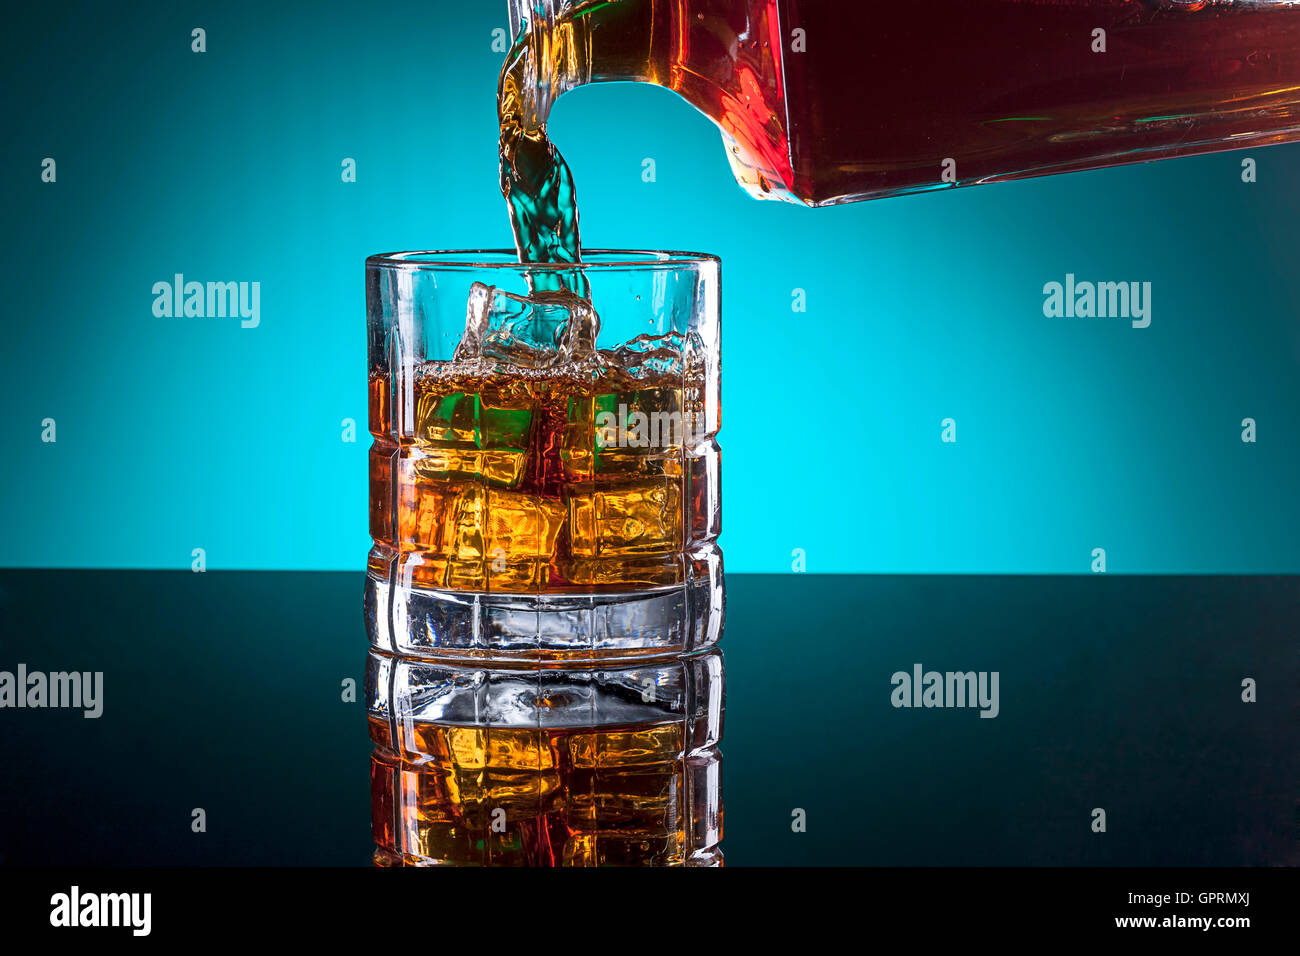 Pouring a drink. Stock Photo